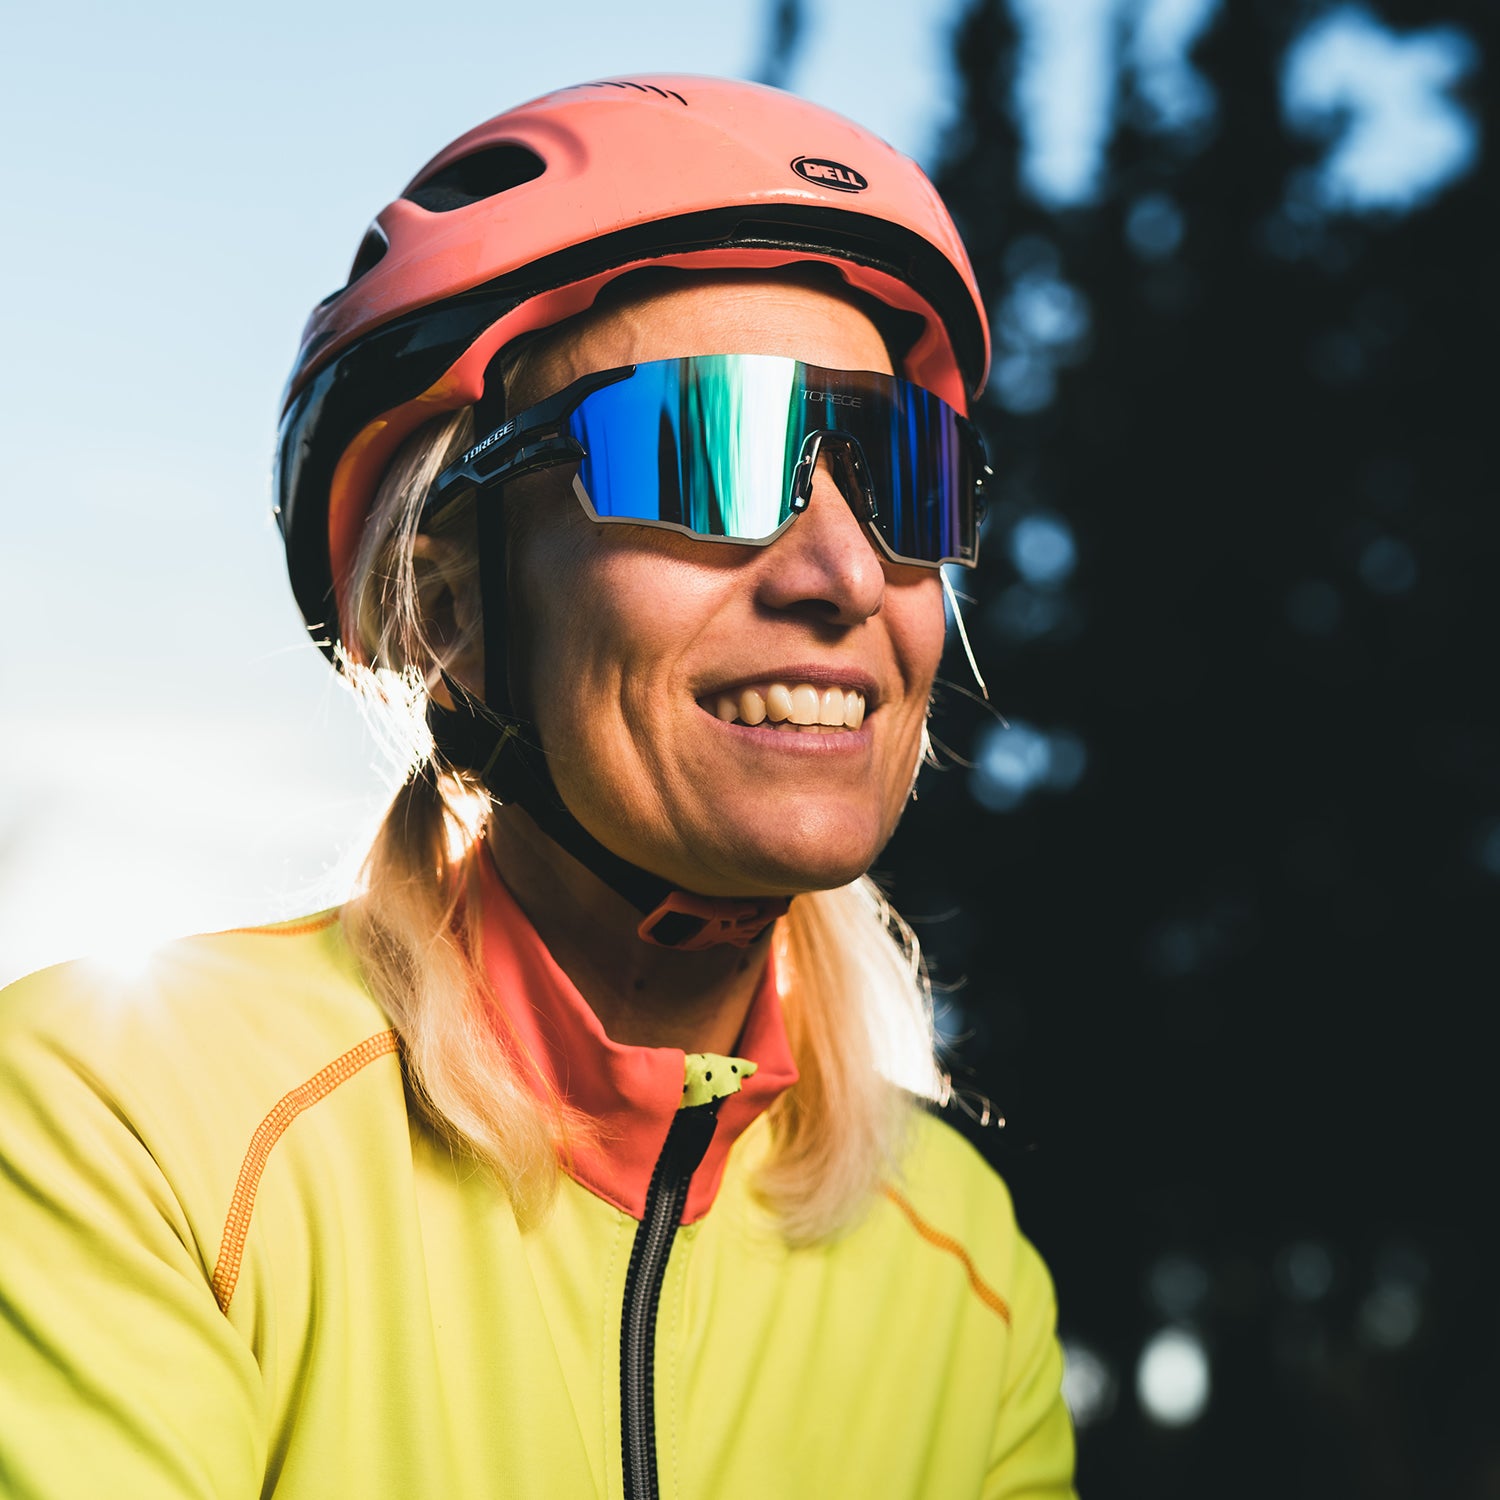 Gaiety Wraparound Sports Sunglasses for Women - Ultra Lightweight and  Durable - Lifetime Warranty - Ideal for Cycling, Hiking, Fishing, Golf, and  Running - Matte White Frame & Neon Pink Lens